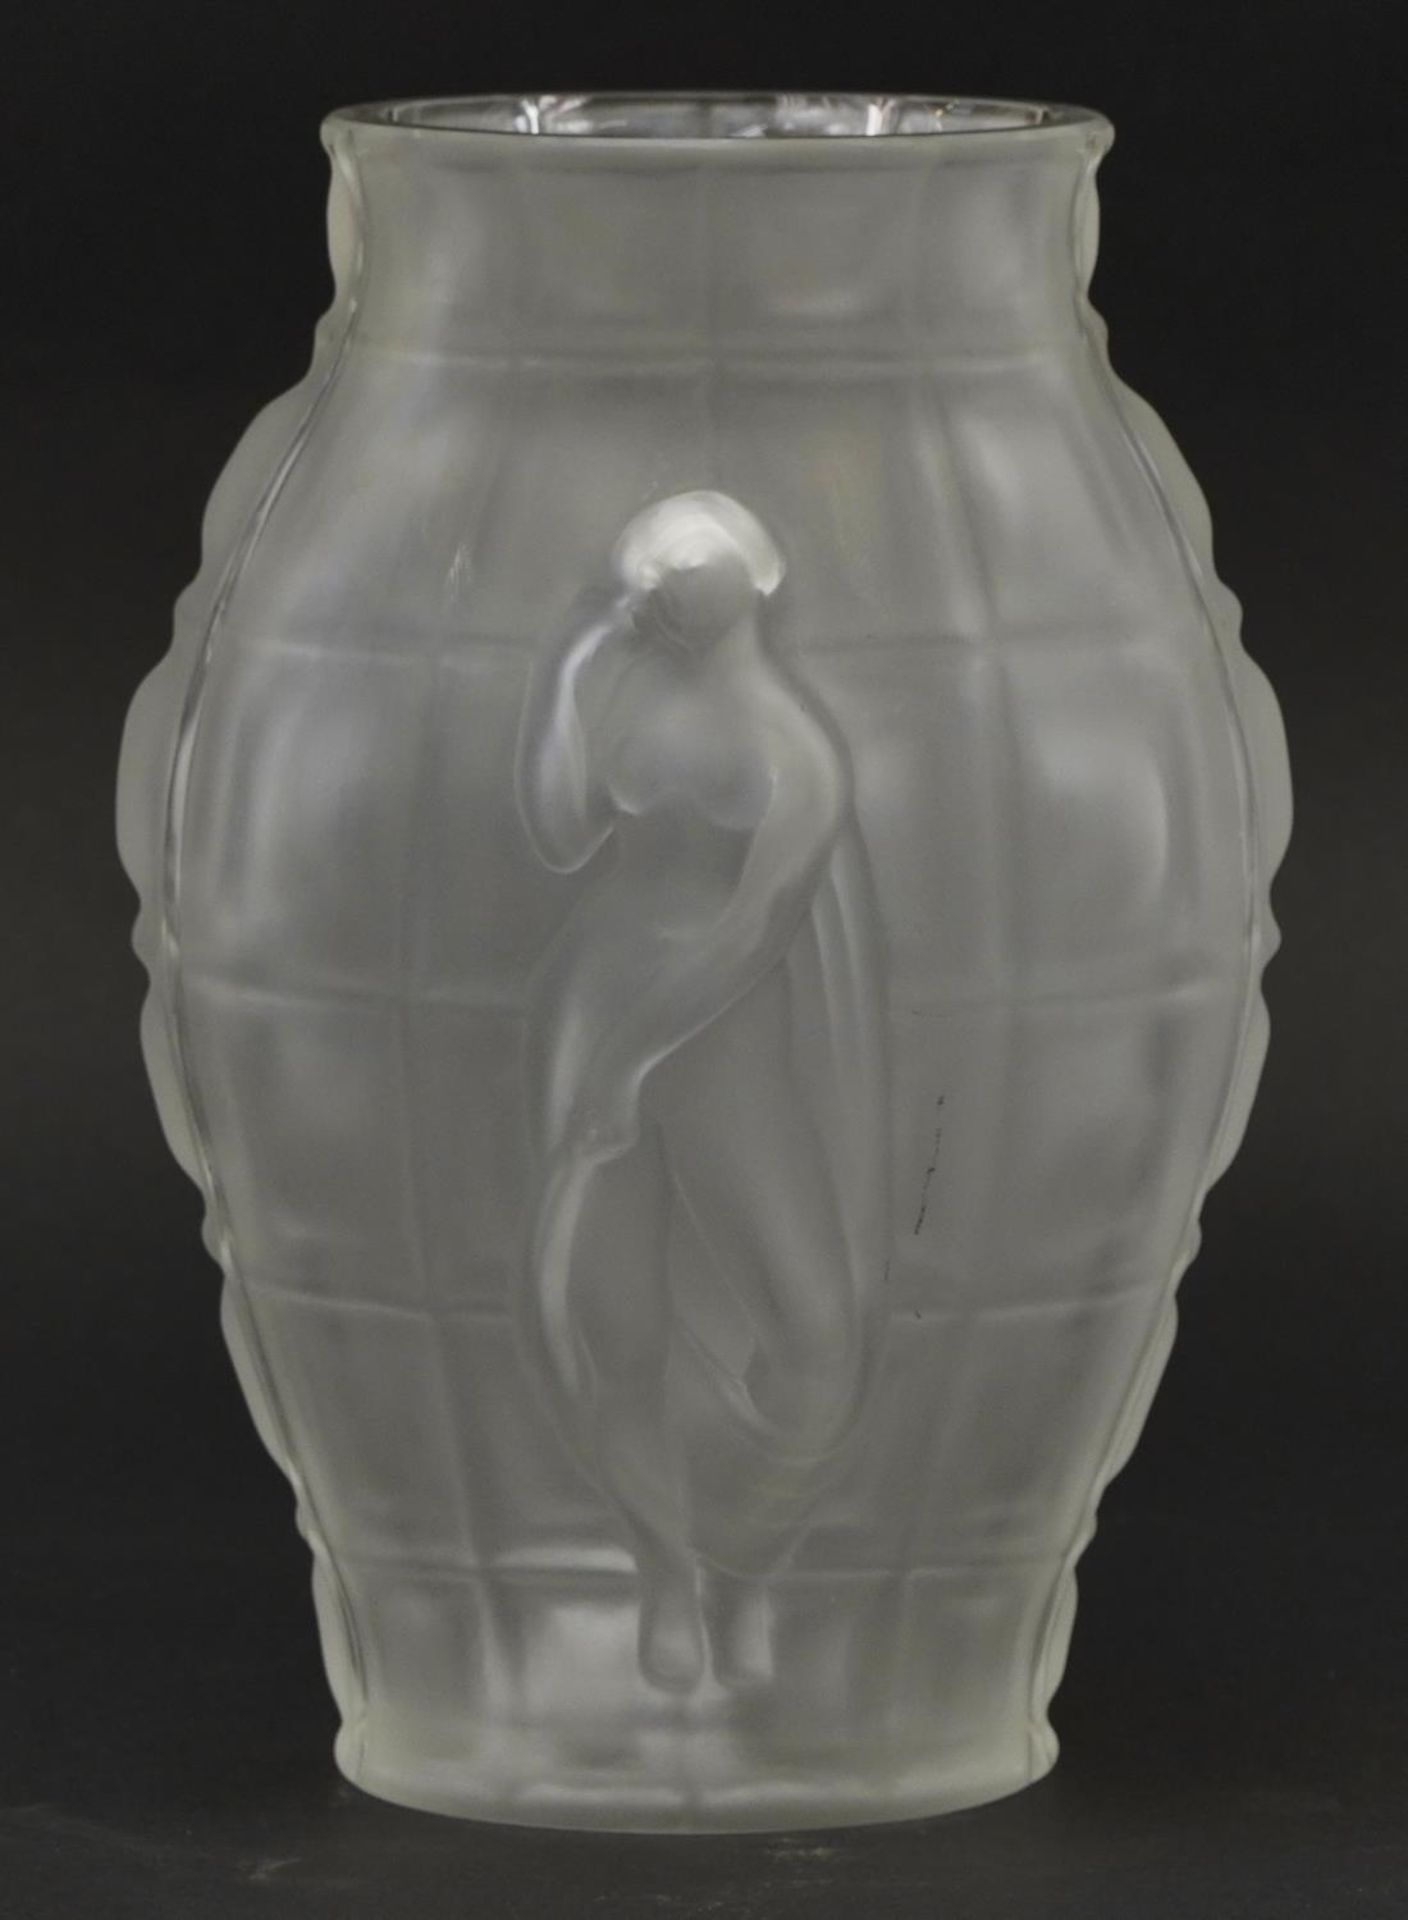 Czech Desna frosted glass design vase moulded in relief with nude females, 24.5cm high